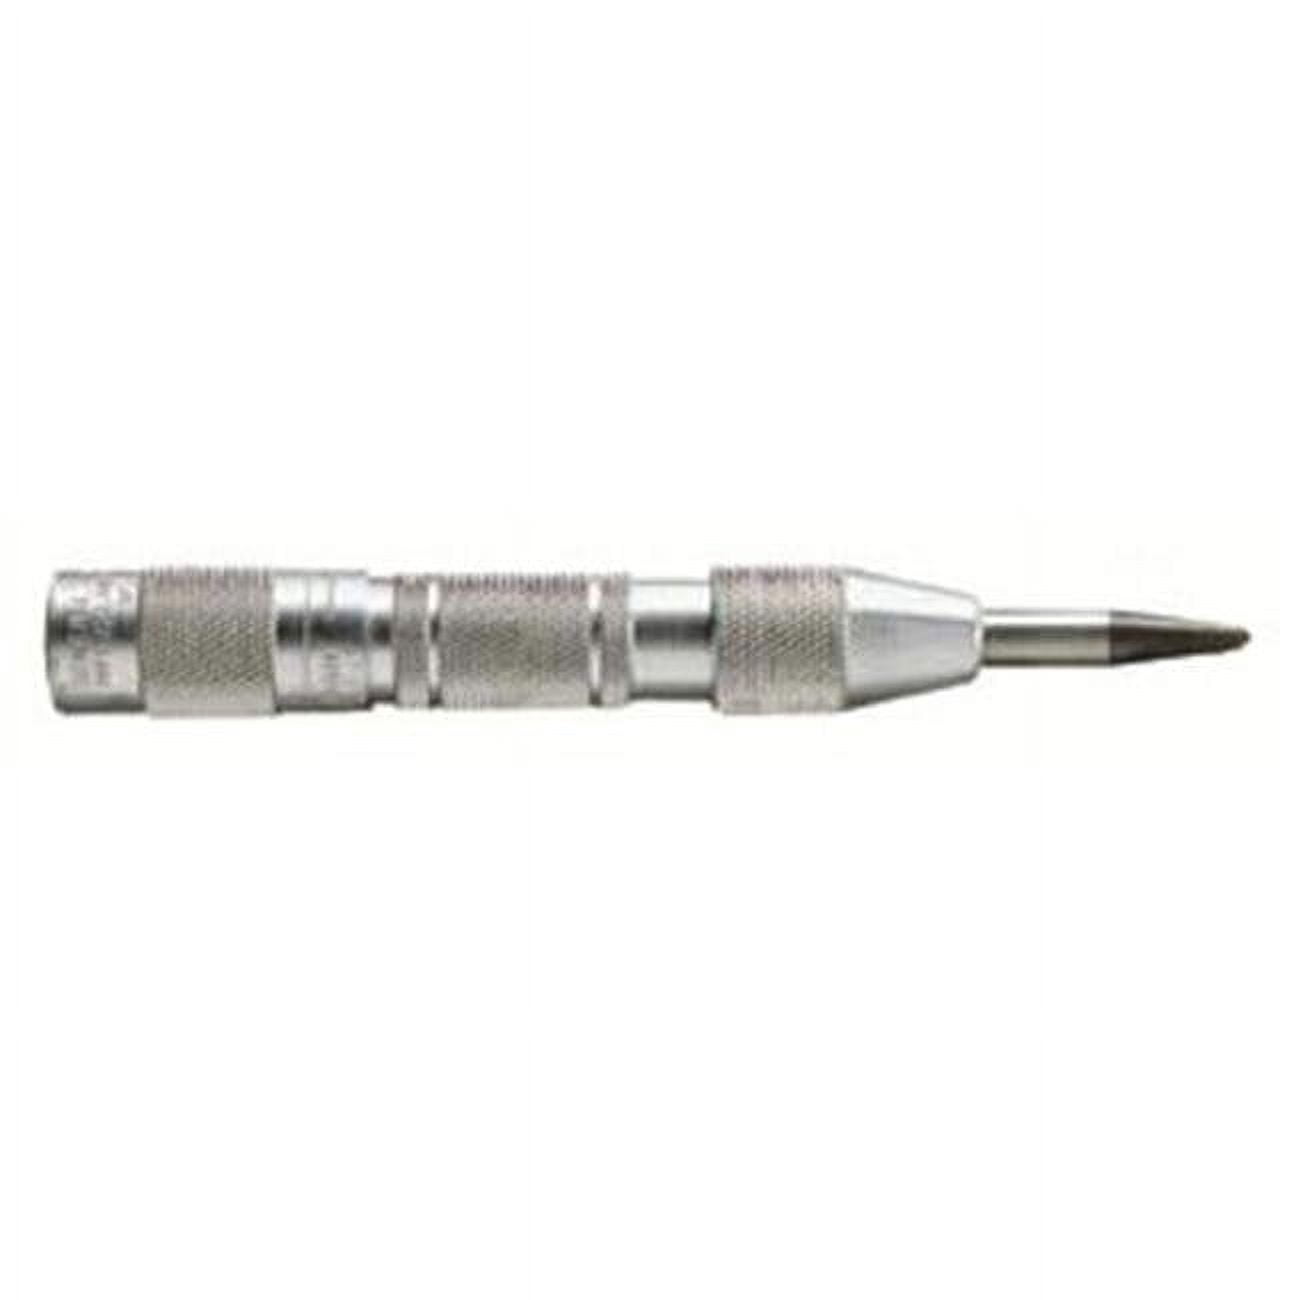 General Tools 78 Heavy Duty Automatic Center Punch